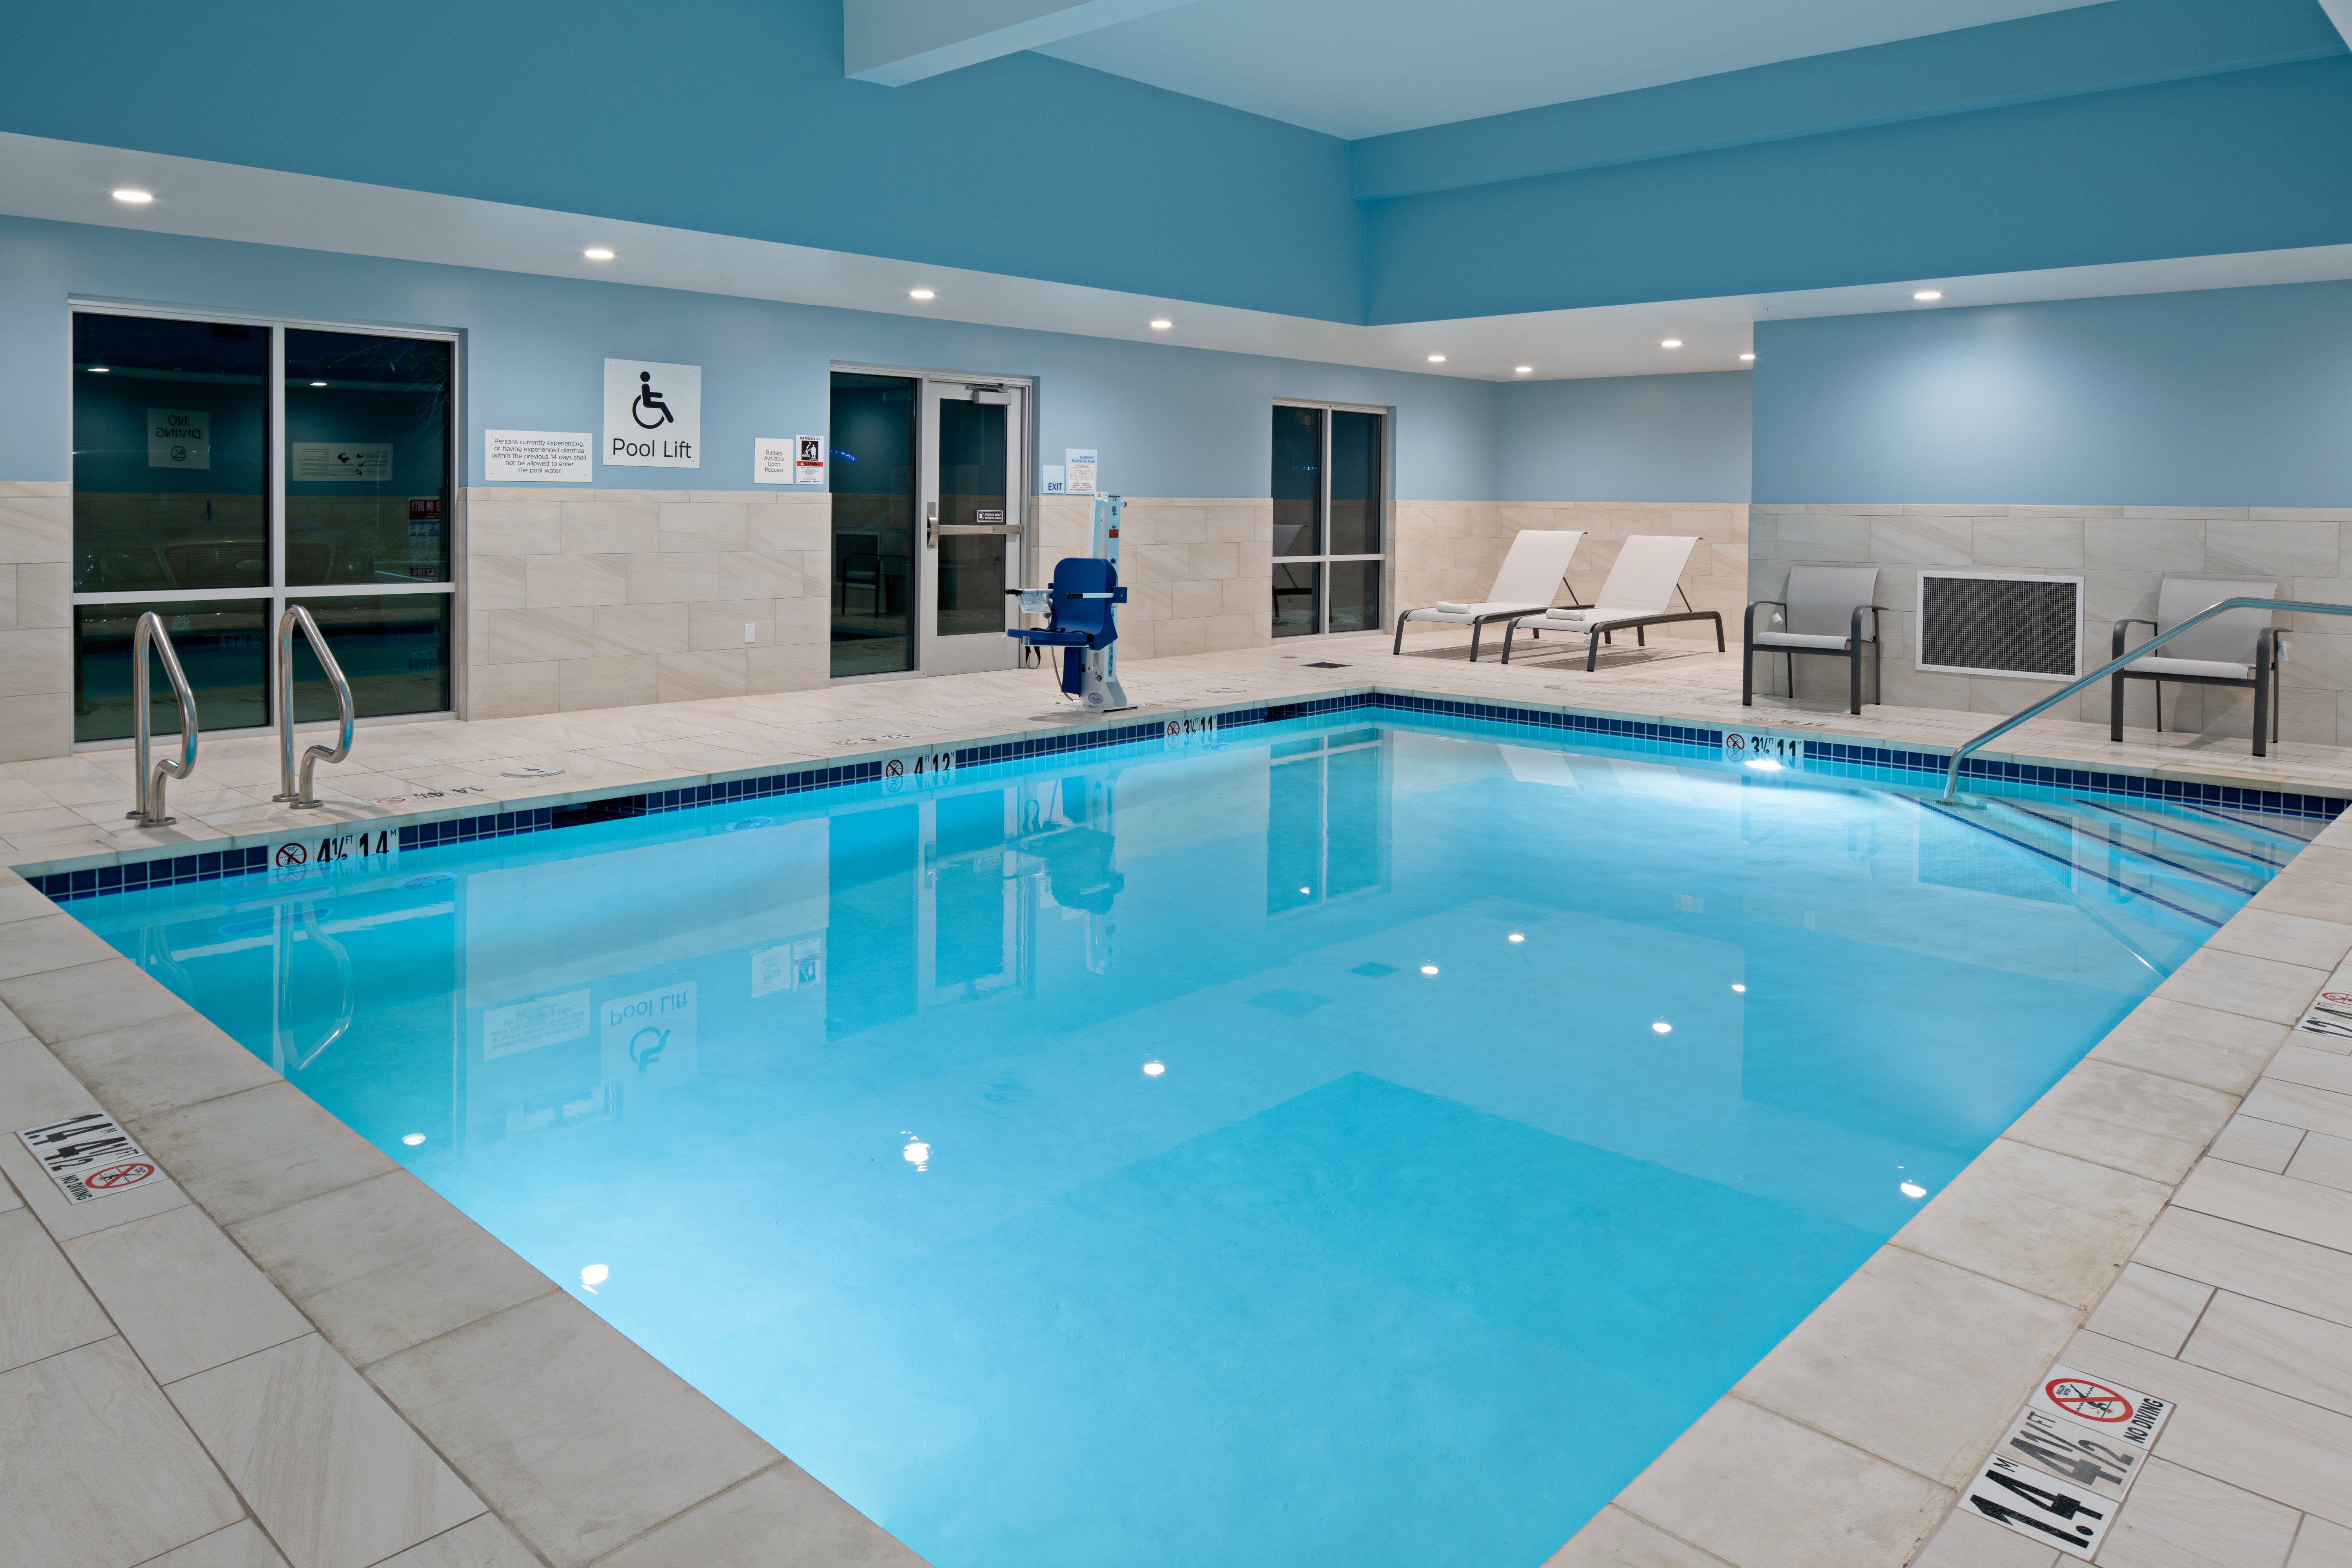 Enjoy our indoor pool after your sports tournament